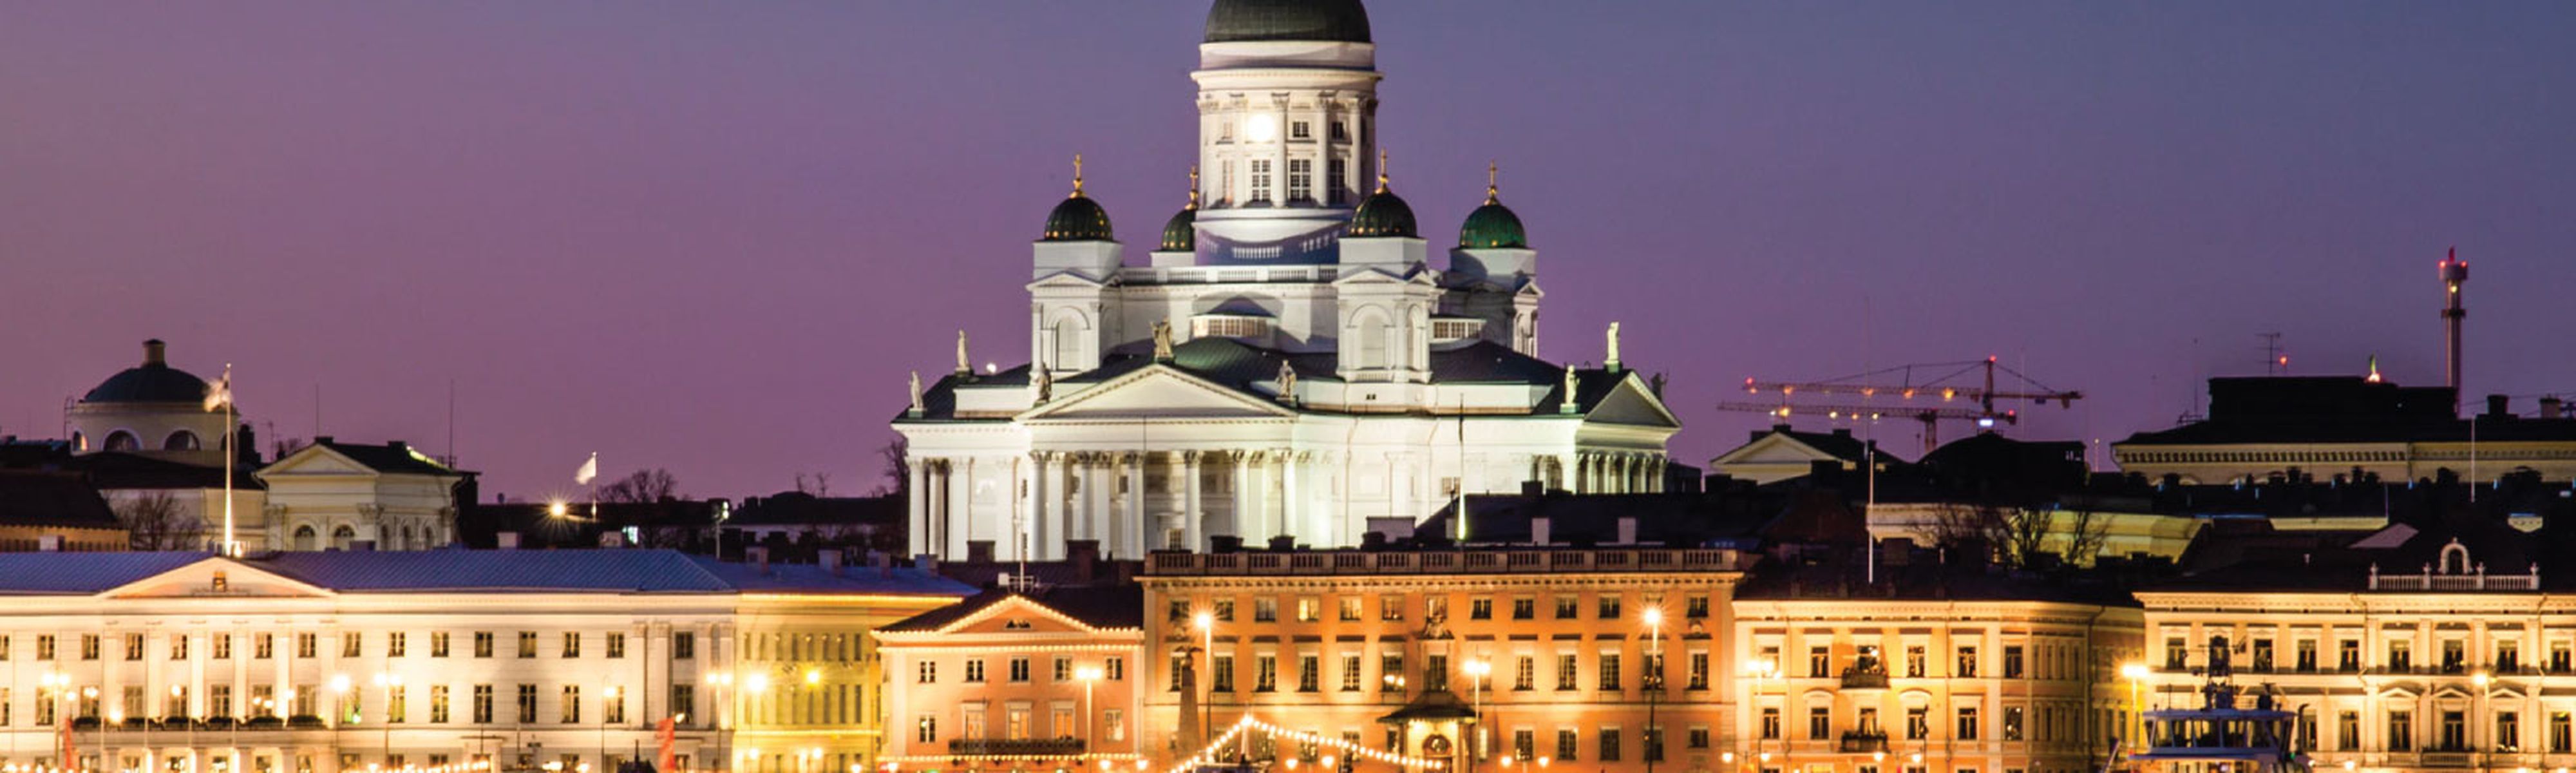 helsinki cathedral lit up at night in finland